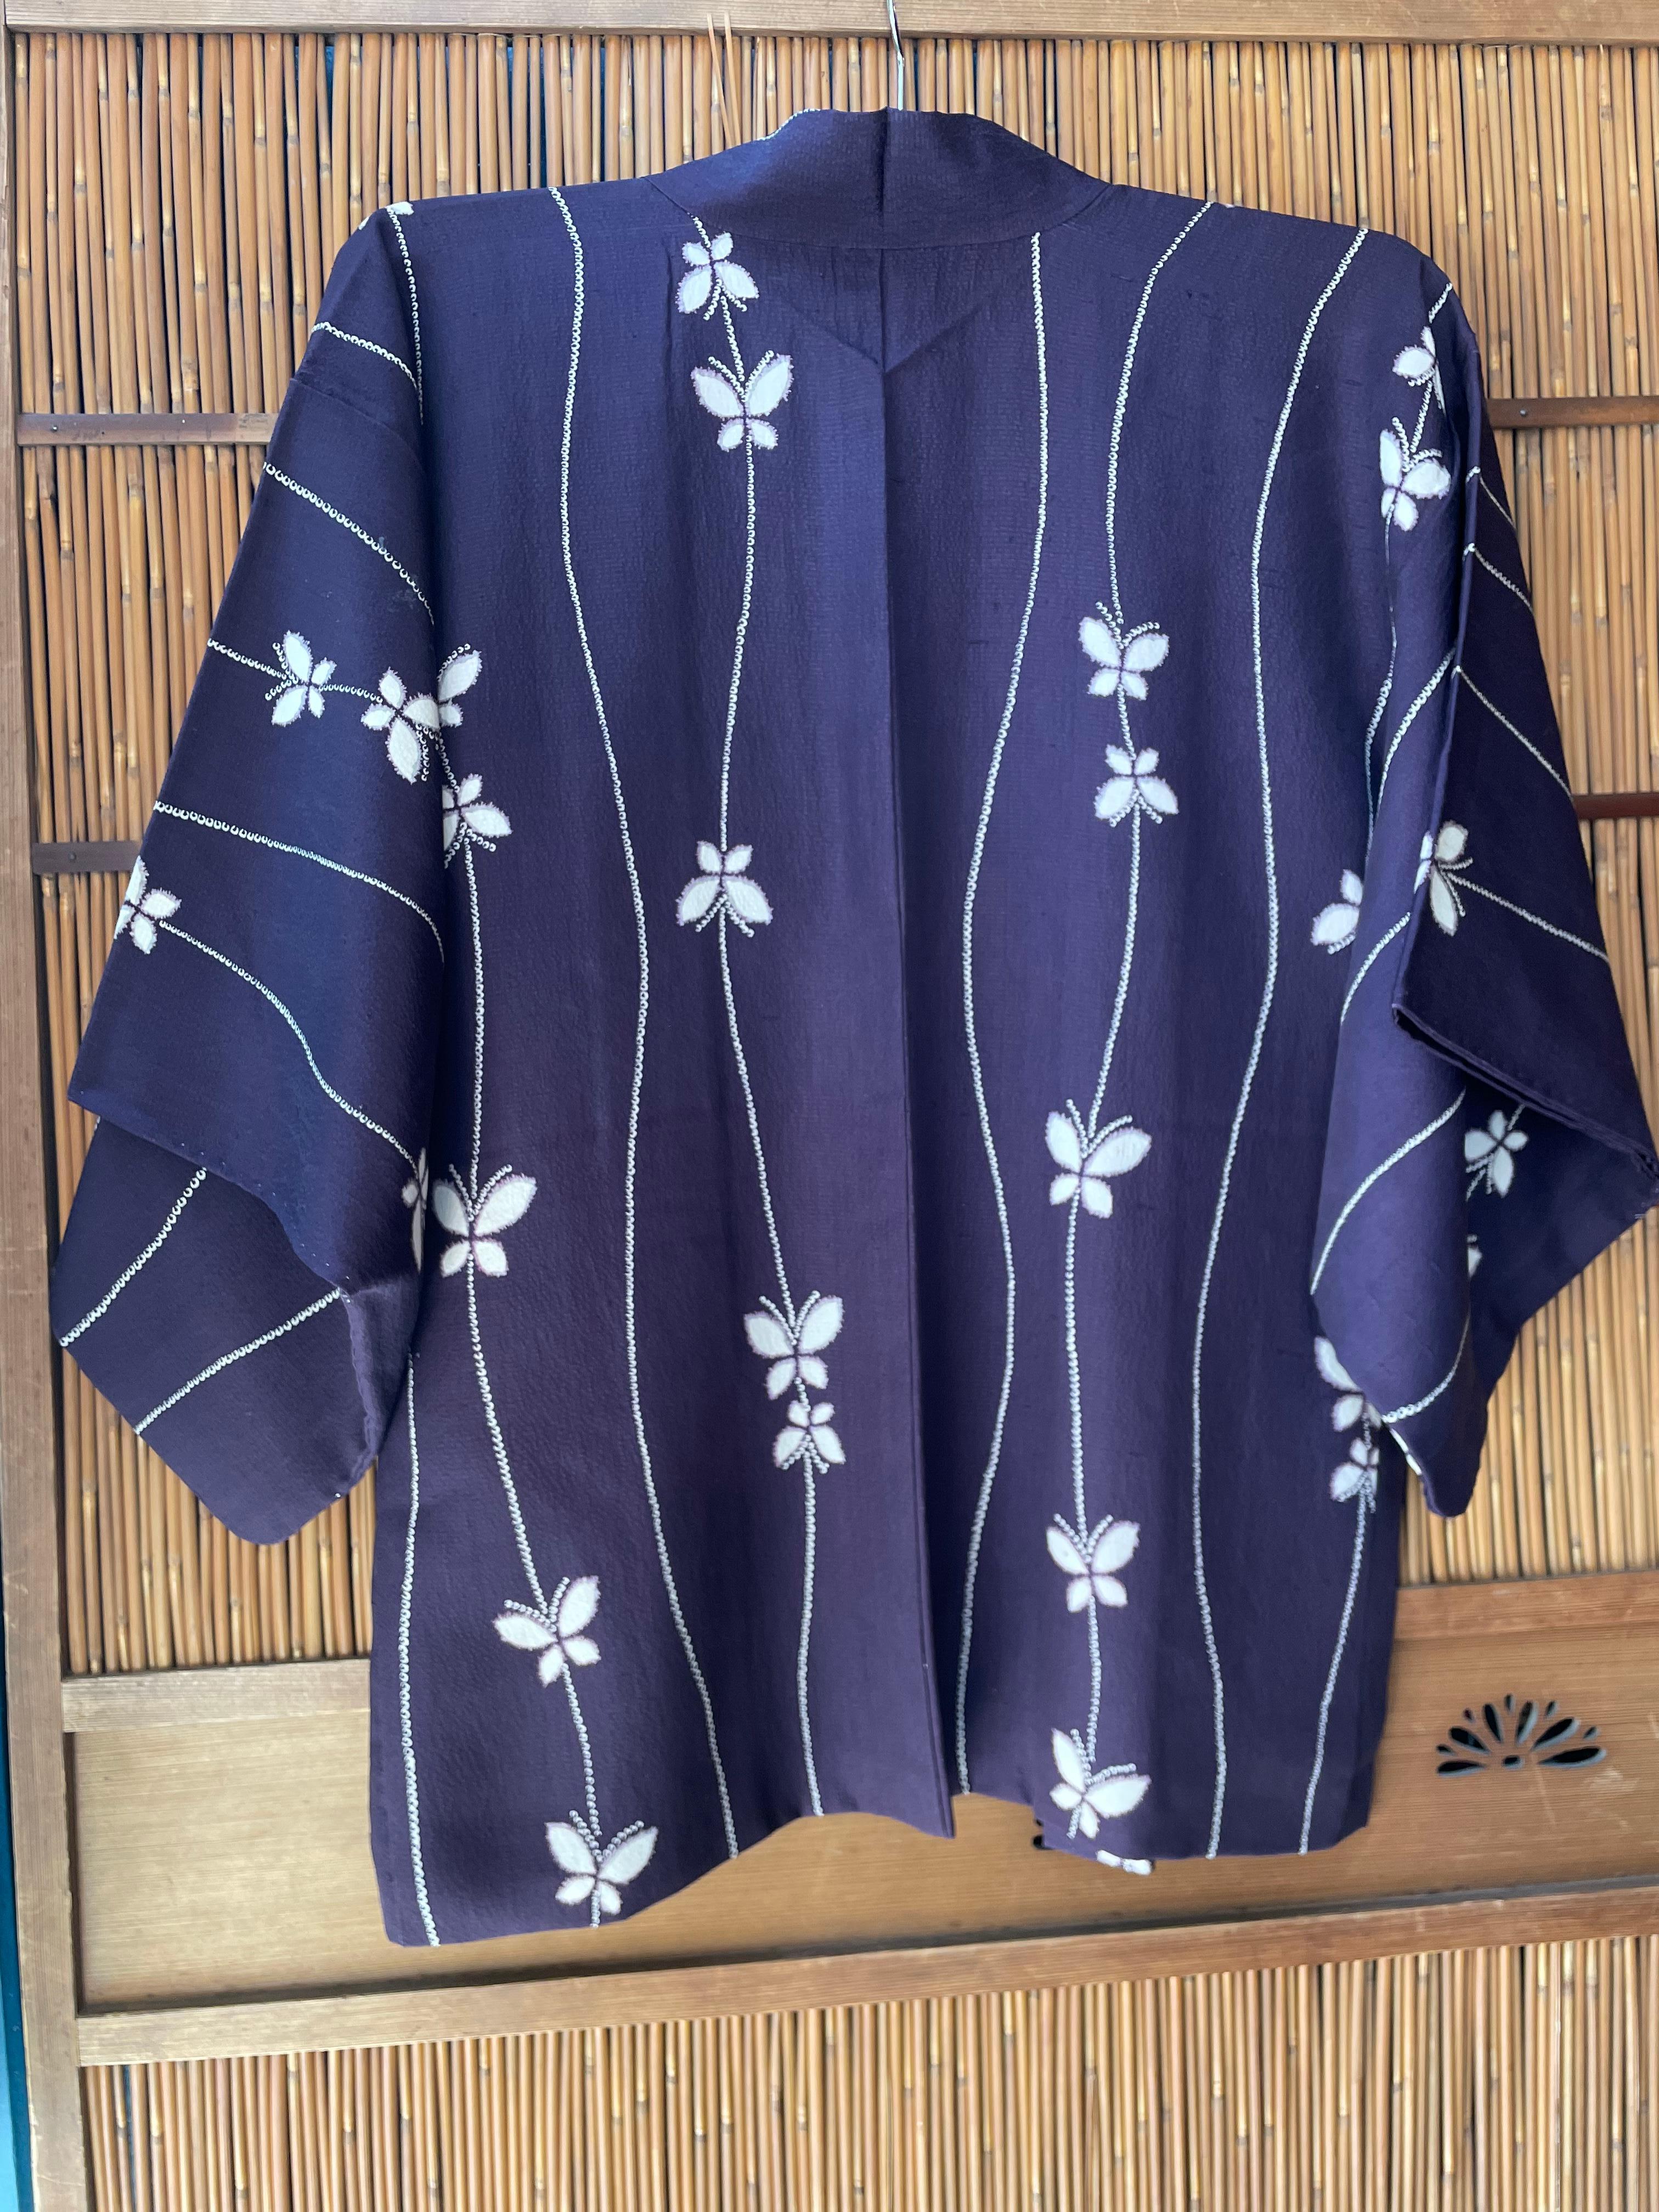 This is a jacket for women called Haori in Japan. This was made around 1940s in Showa era.

-Details-
Design: butterflies 
Fabric: Silk
Era: Showa (1940 - 1950)
Color: purple and white

Dimensions(cm):
Length 77
Width: 64
Sleeve length: